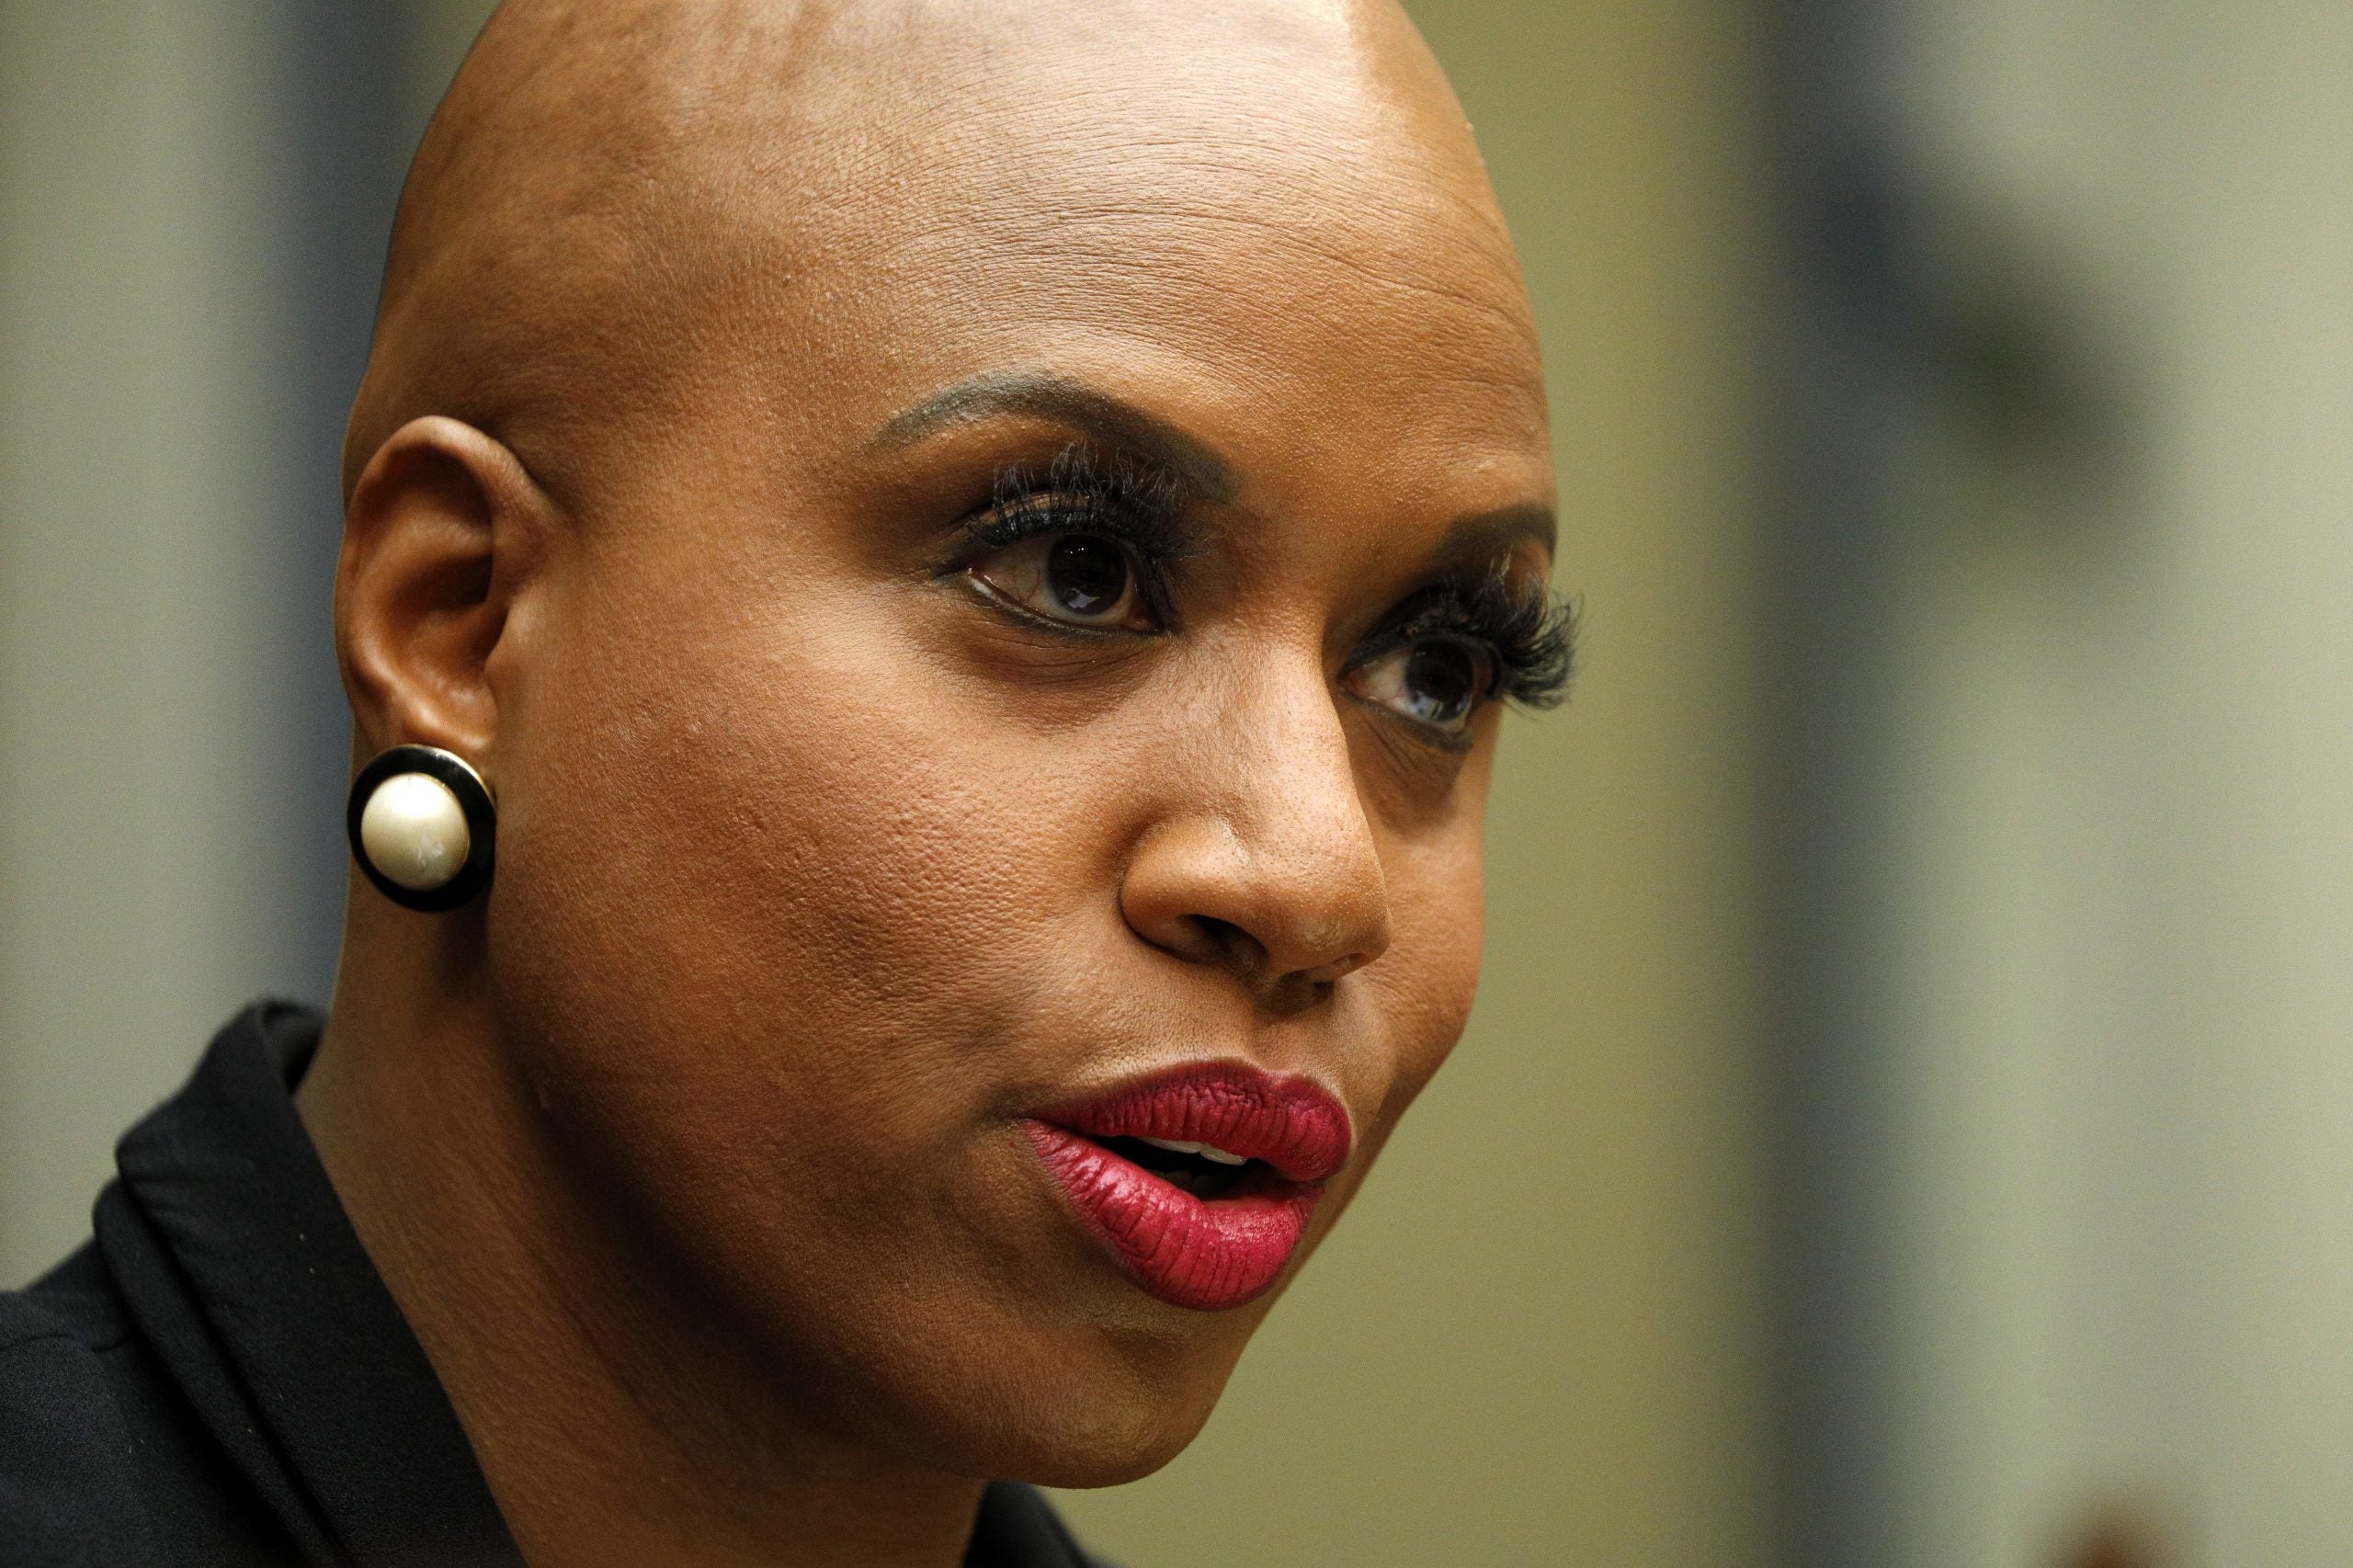 Rep. Pressley's Panic Buttons Were Torn Out During Attack On Capitol. No One Knows Why.